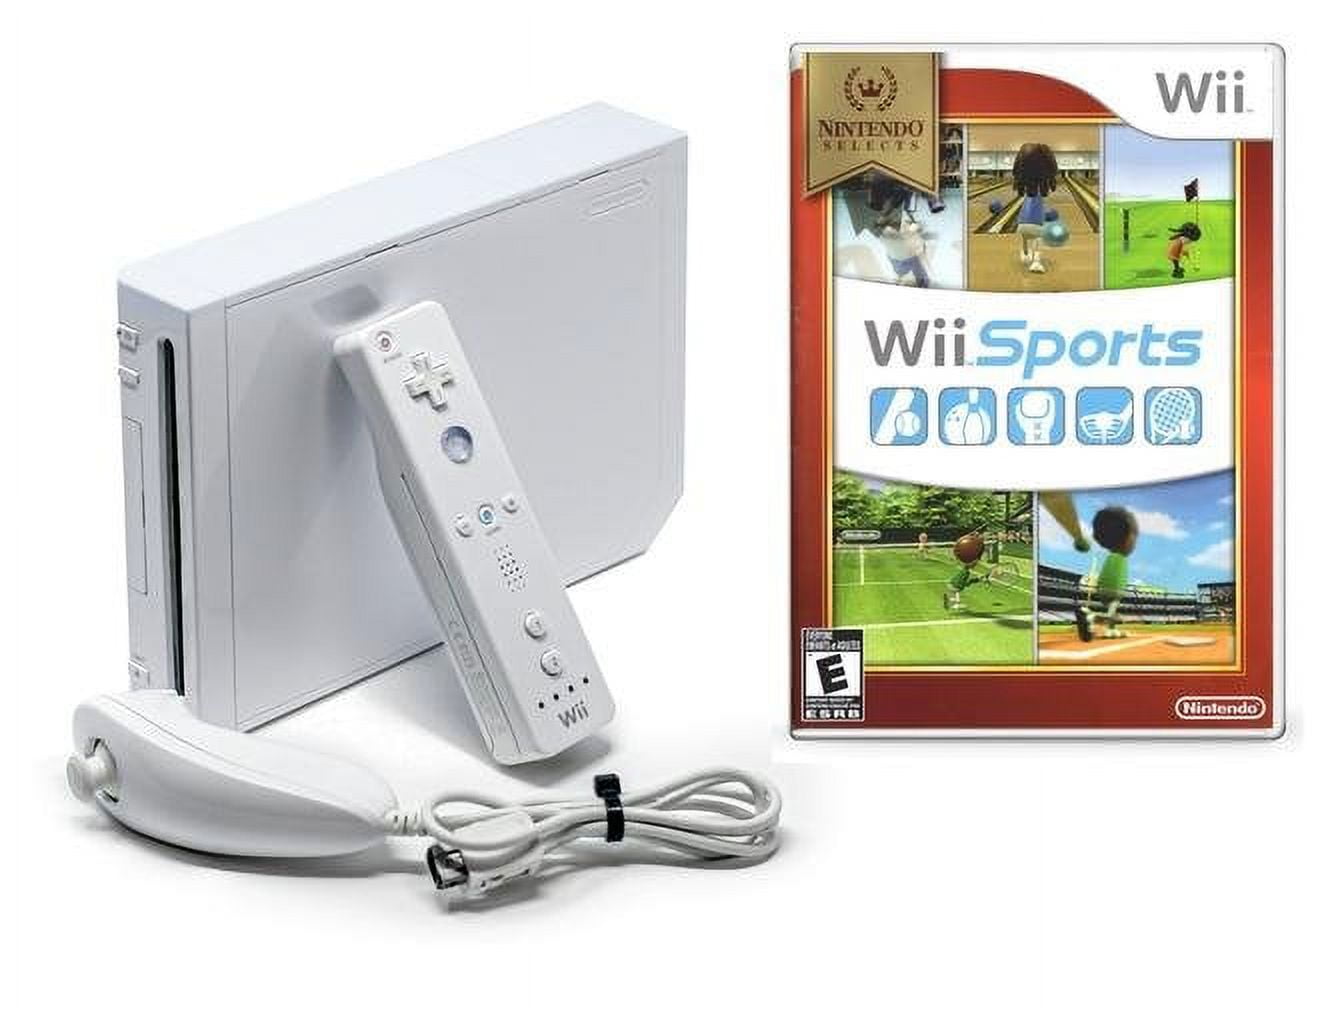 Nintendo Wii (Black) Replacement Console Only - No Cables Or Accessories  (Renewed): nintendo_wii: Video Games 